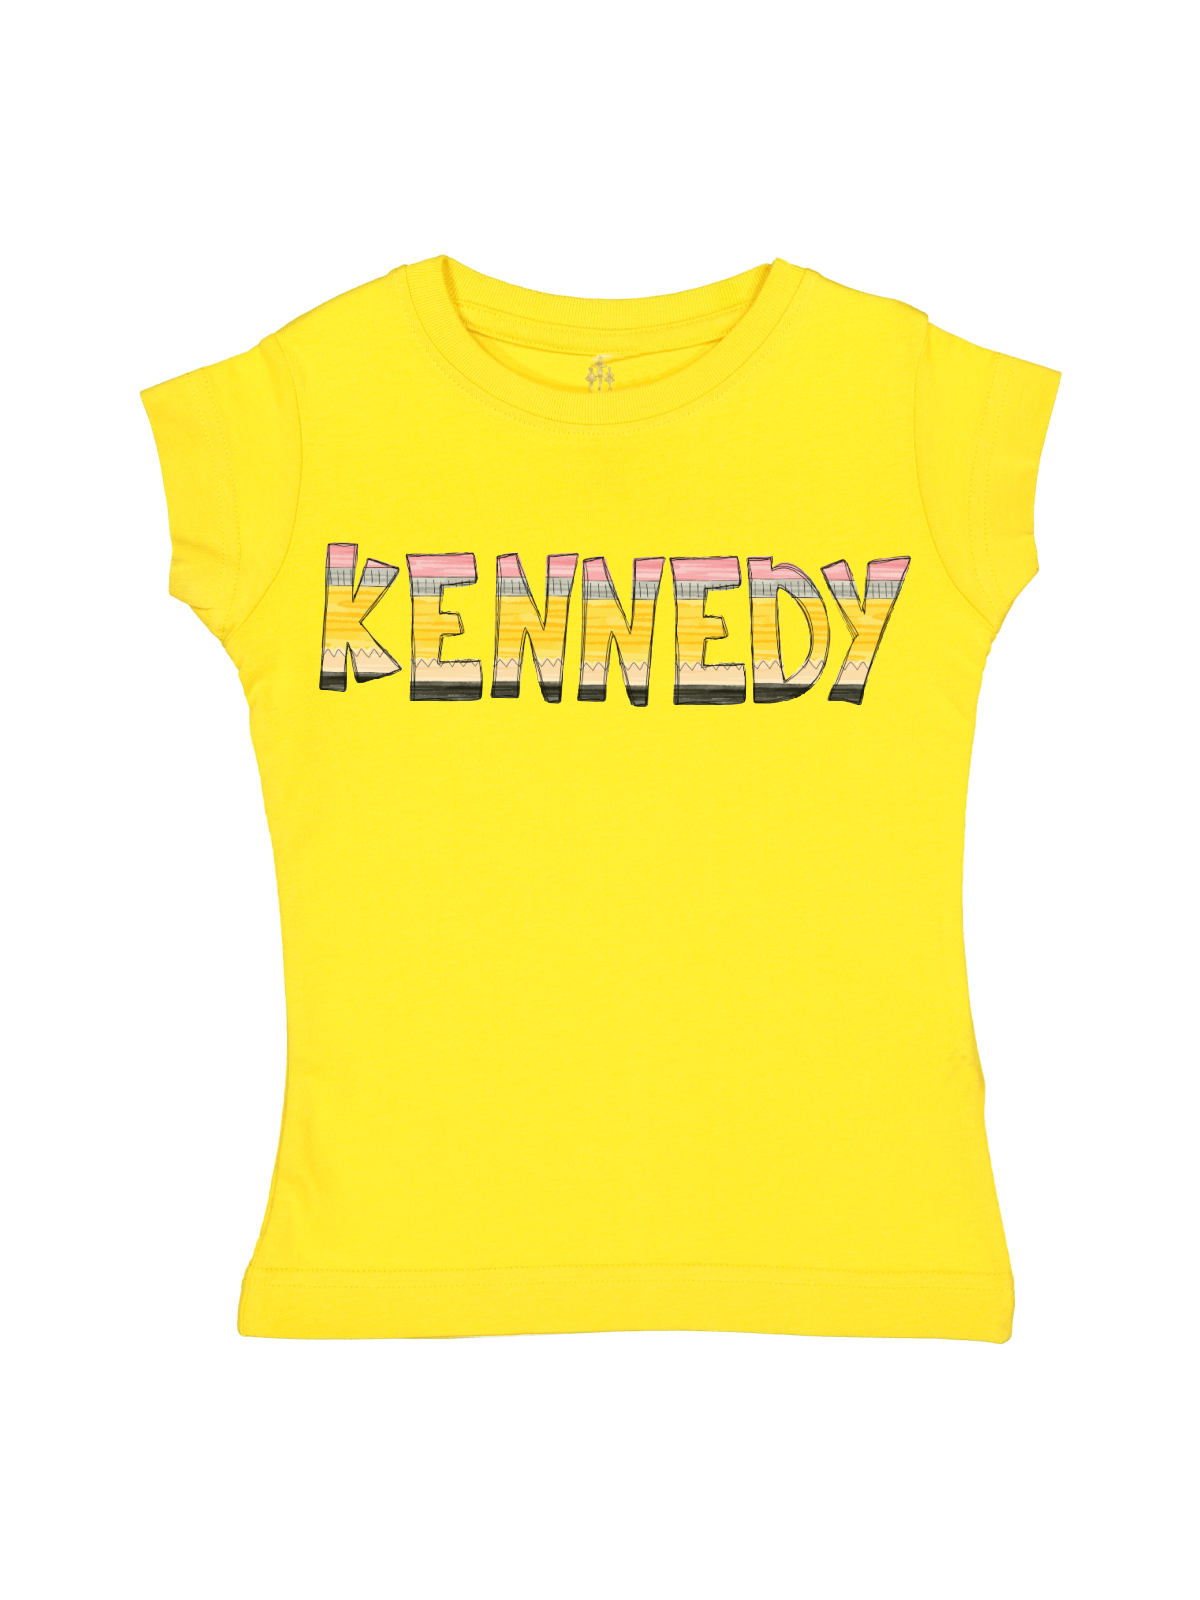 Girls Custom Pencil Name Shirt for First Day of School Yellow